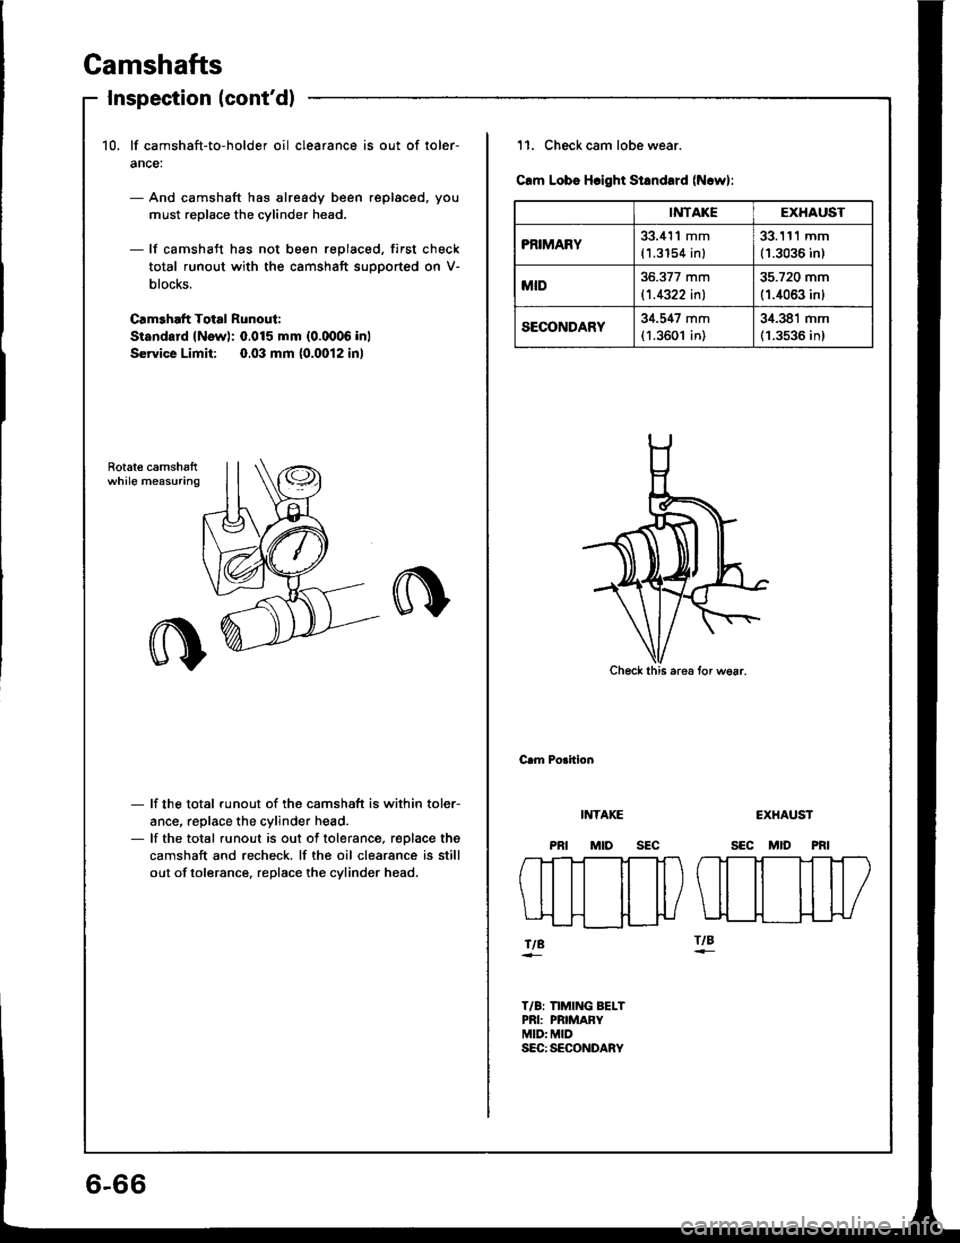 ACURA INTEGRA 1994  Service Repair Manual Gamshafts
Inspection (contd)
10, lf camshaft-to-holder oil clearance is out of loler-
ance:
- And camshaft has already been replaced, you
must replace the cylinder head.
- lf camshaft has not been re